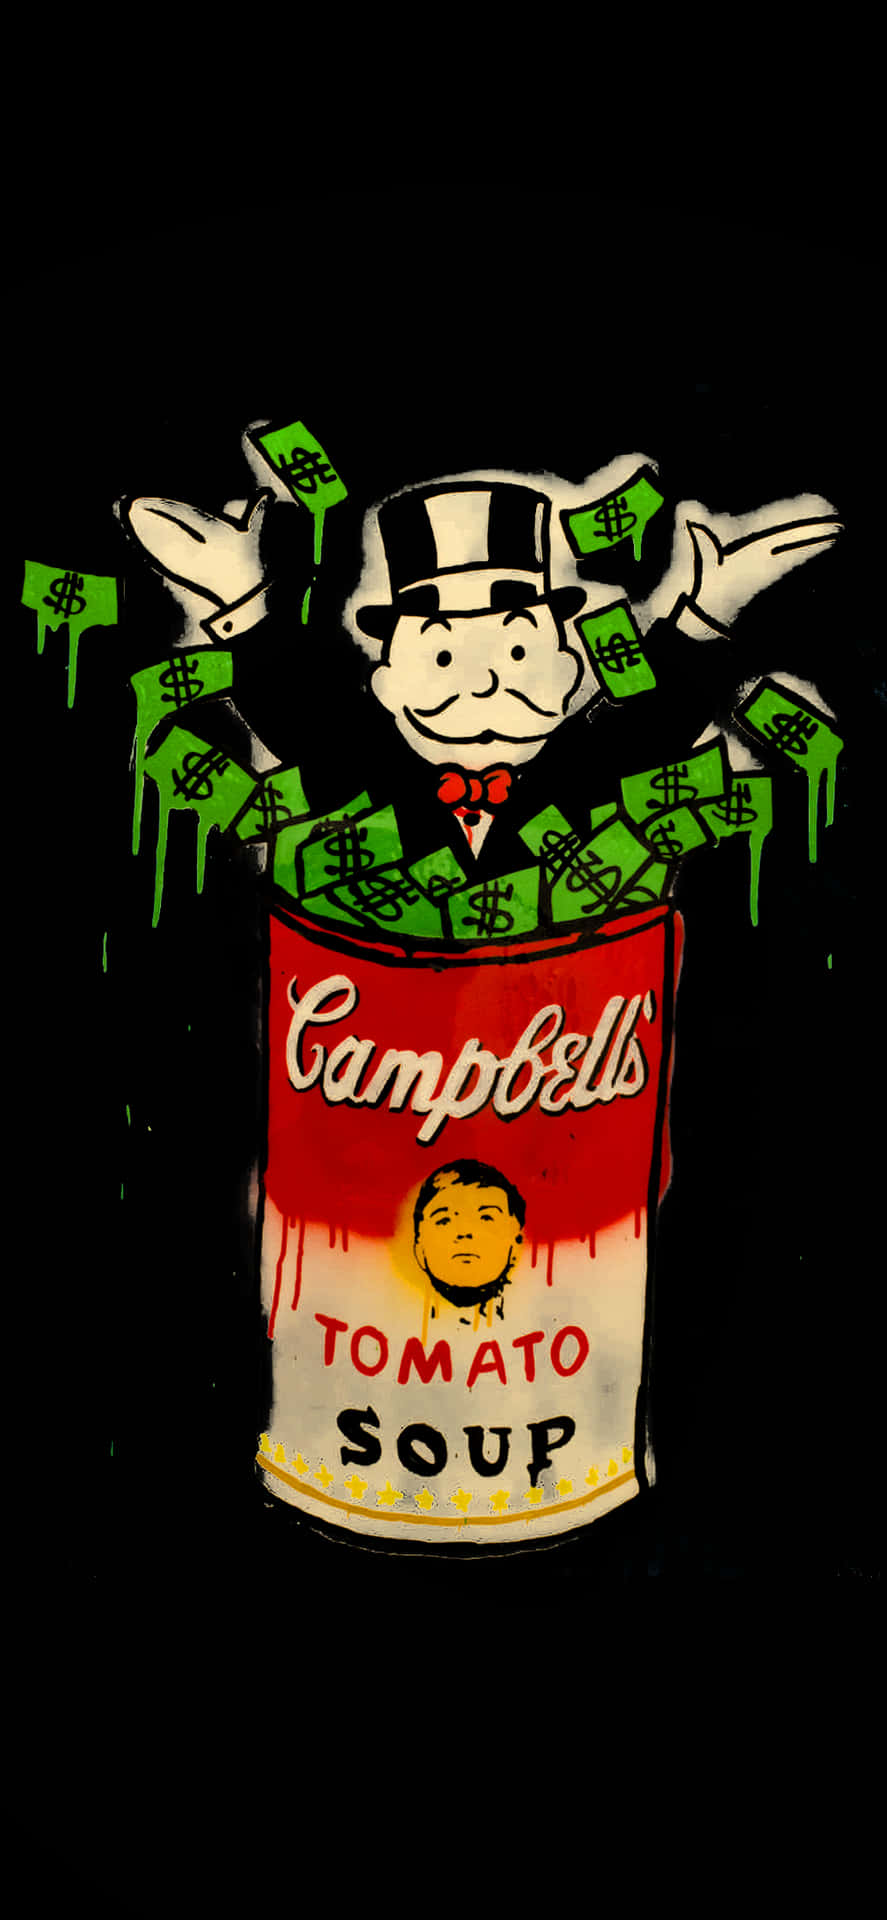 Campbell's Tomato Soup T-shirt